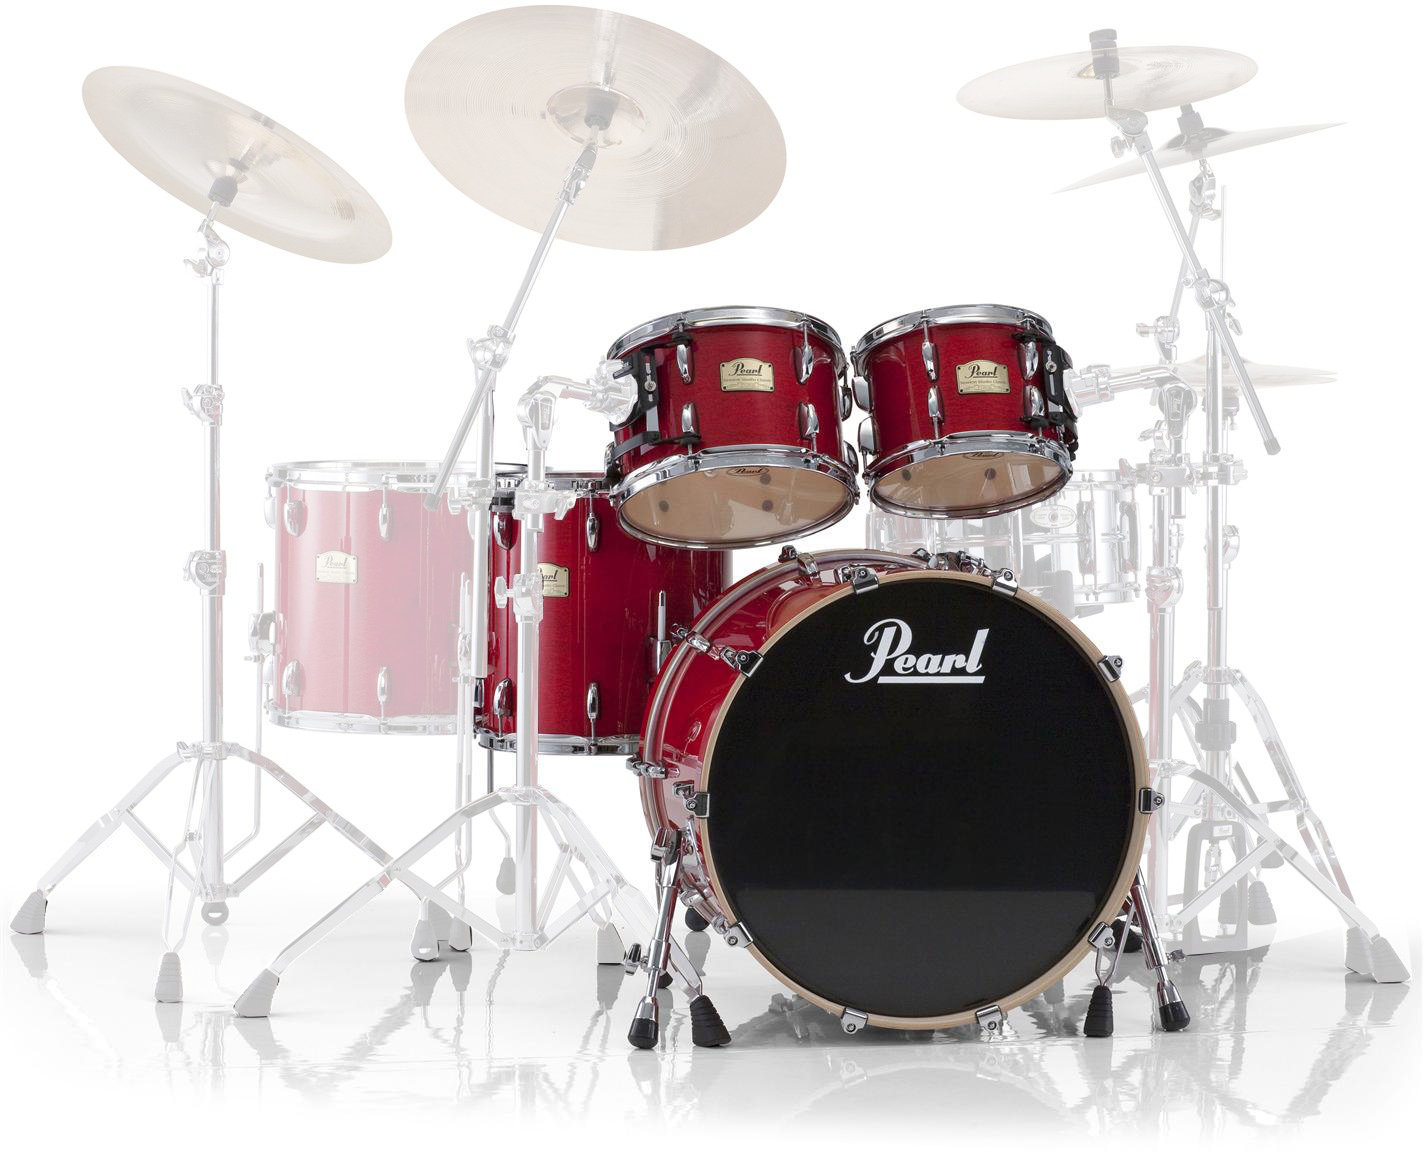 Akustik-Drumset Pearl SSC904XUP-C110 Session Studio Classic Sequoia Red